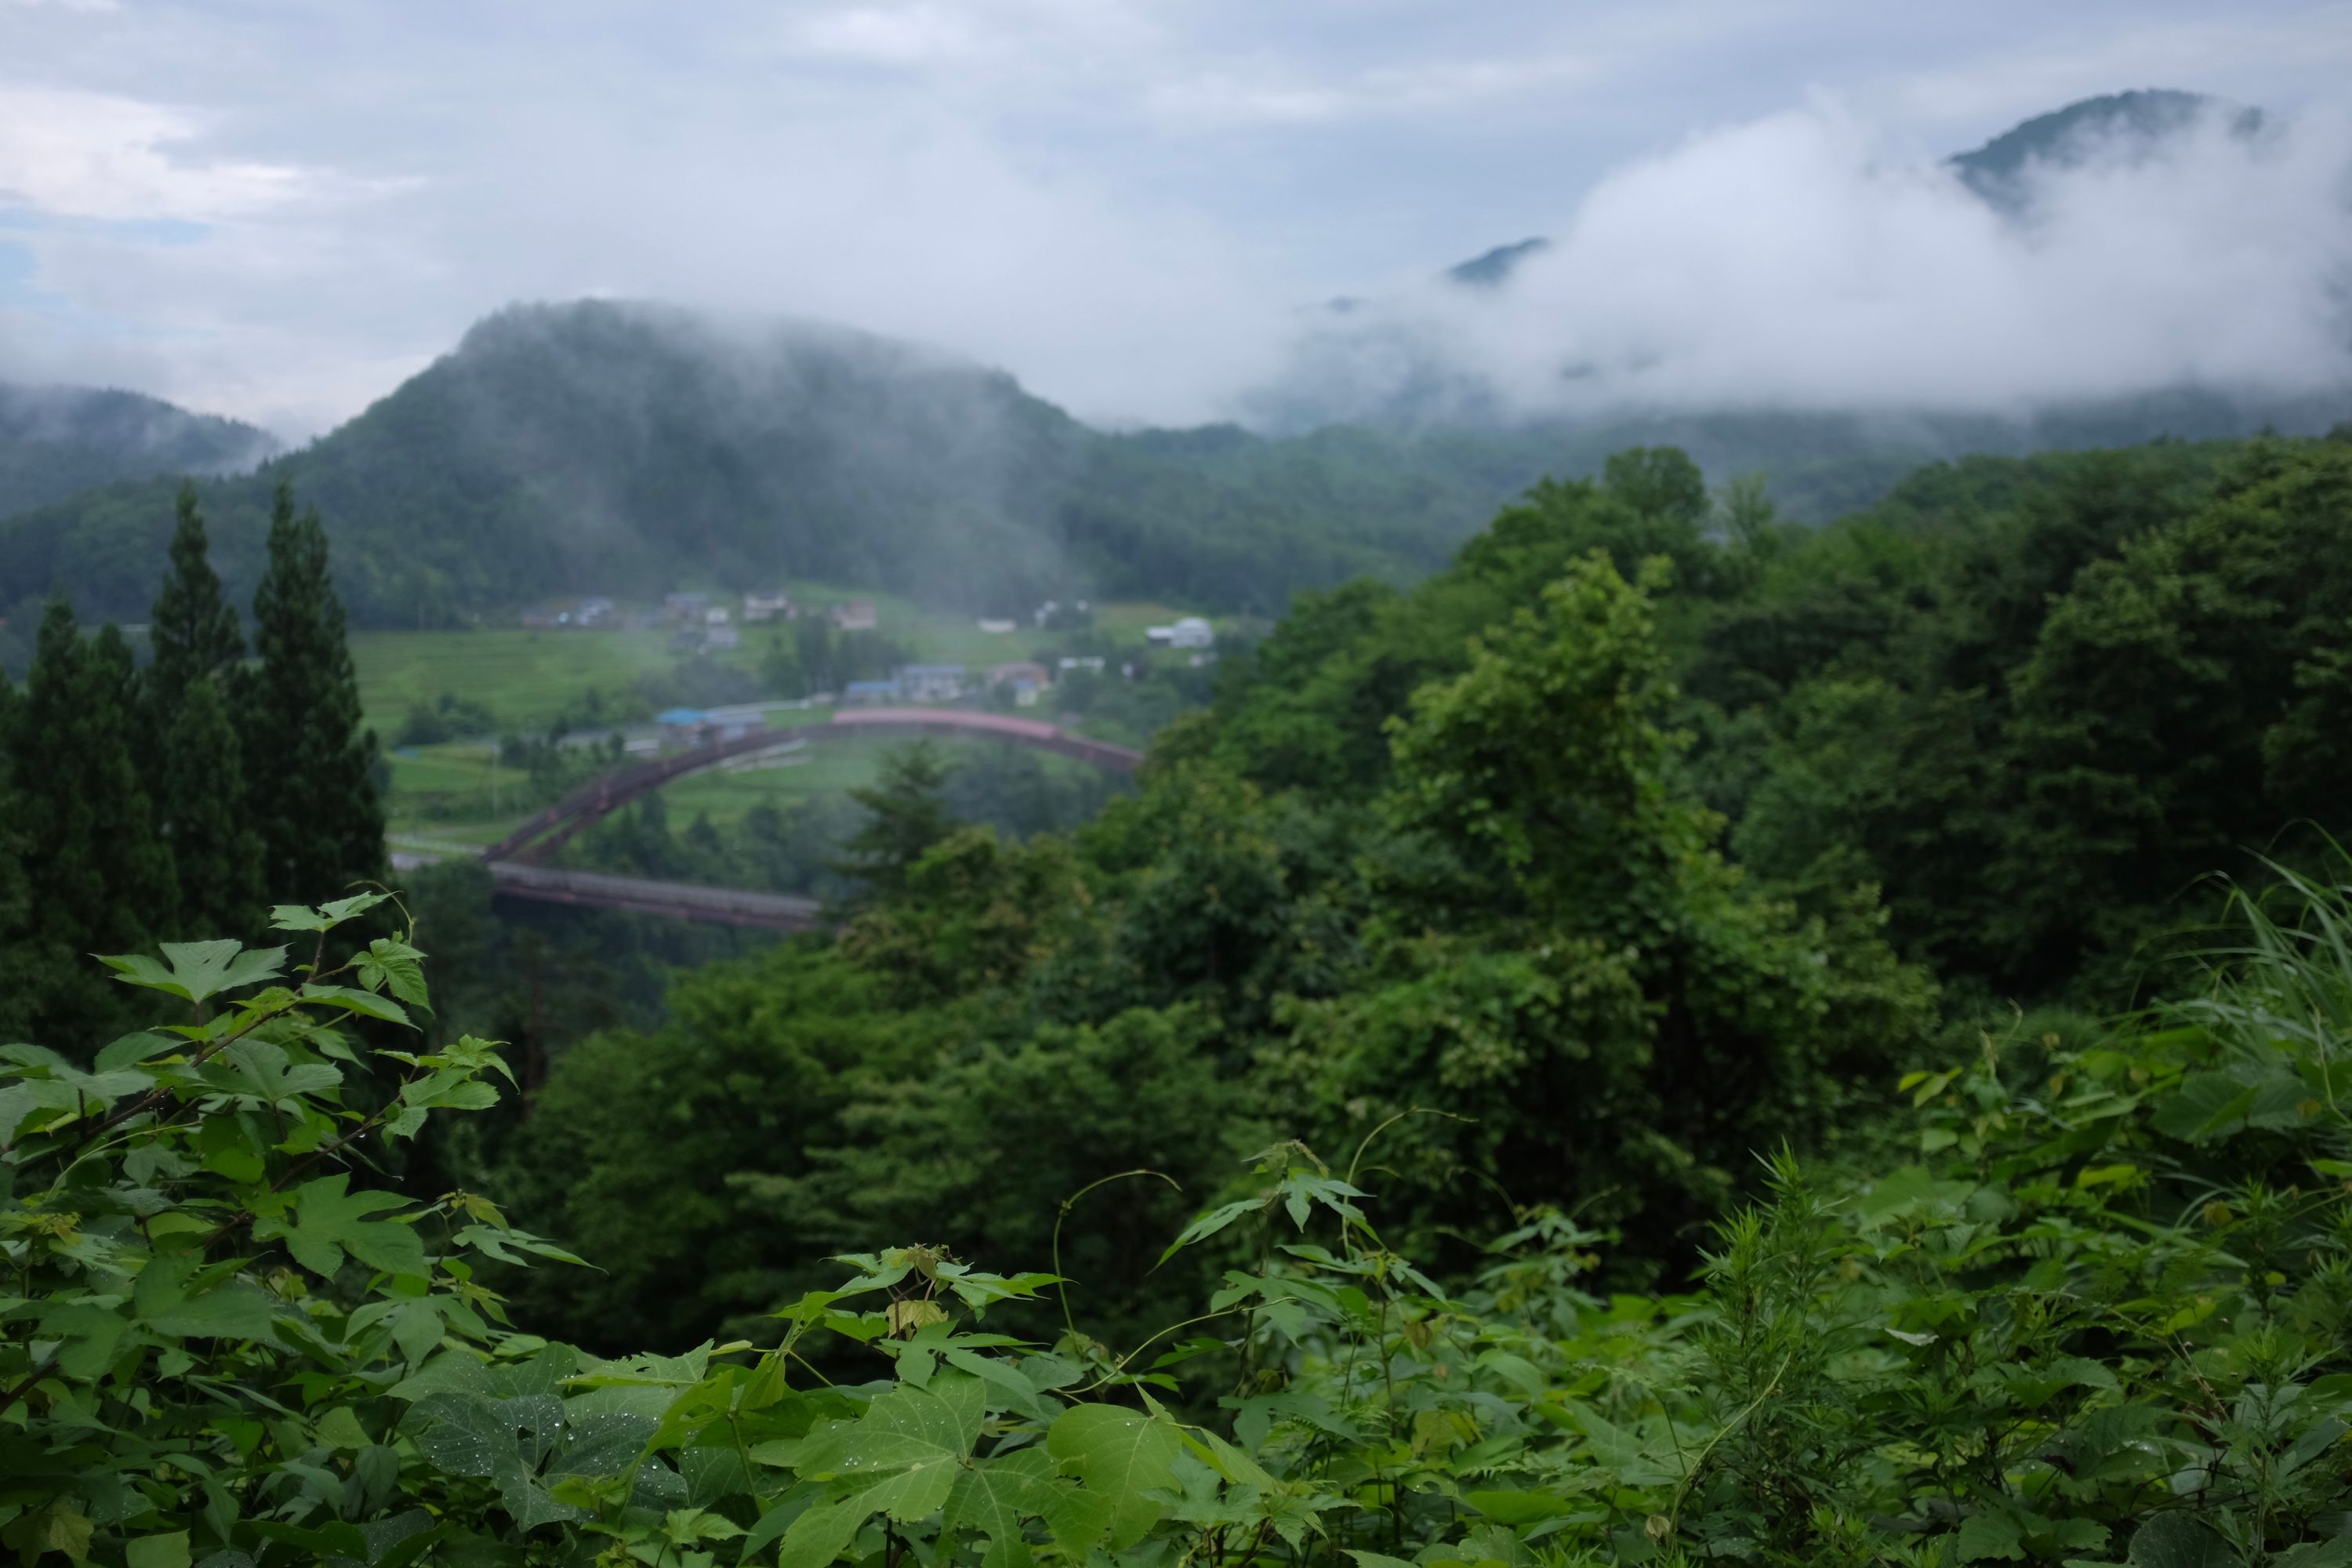 Panorama of a hilly, very green, cloudy landscape, with a bridge and a village in the medium distance.